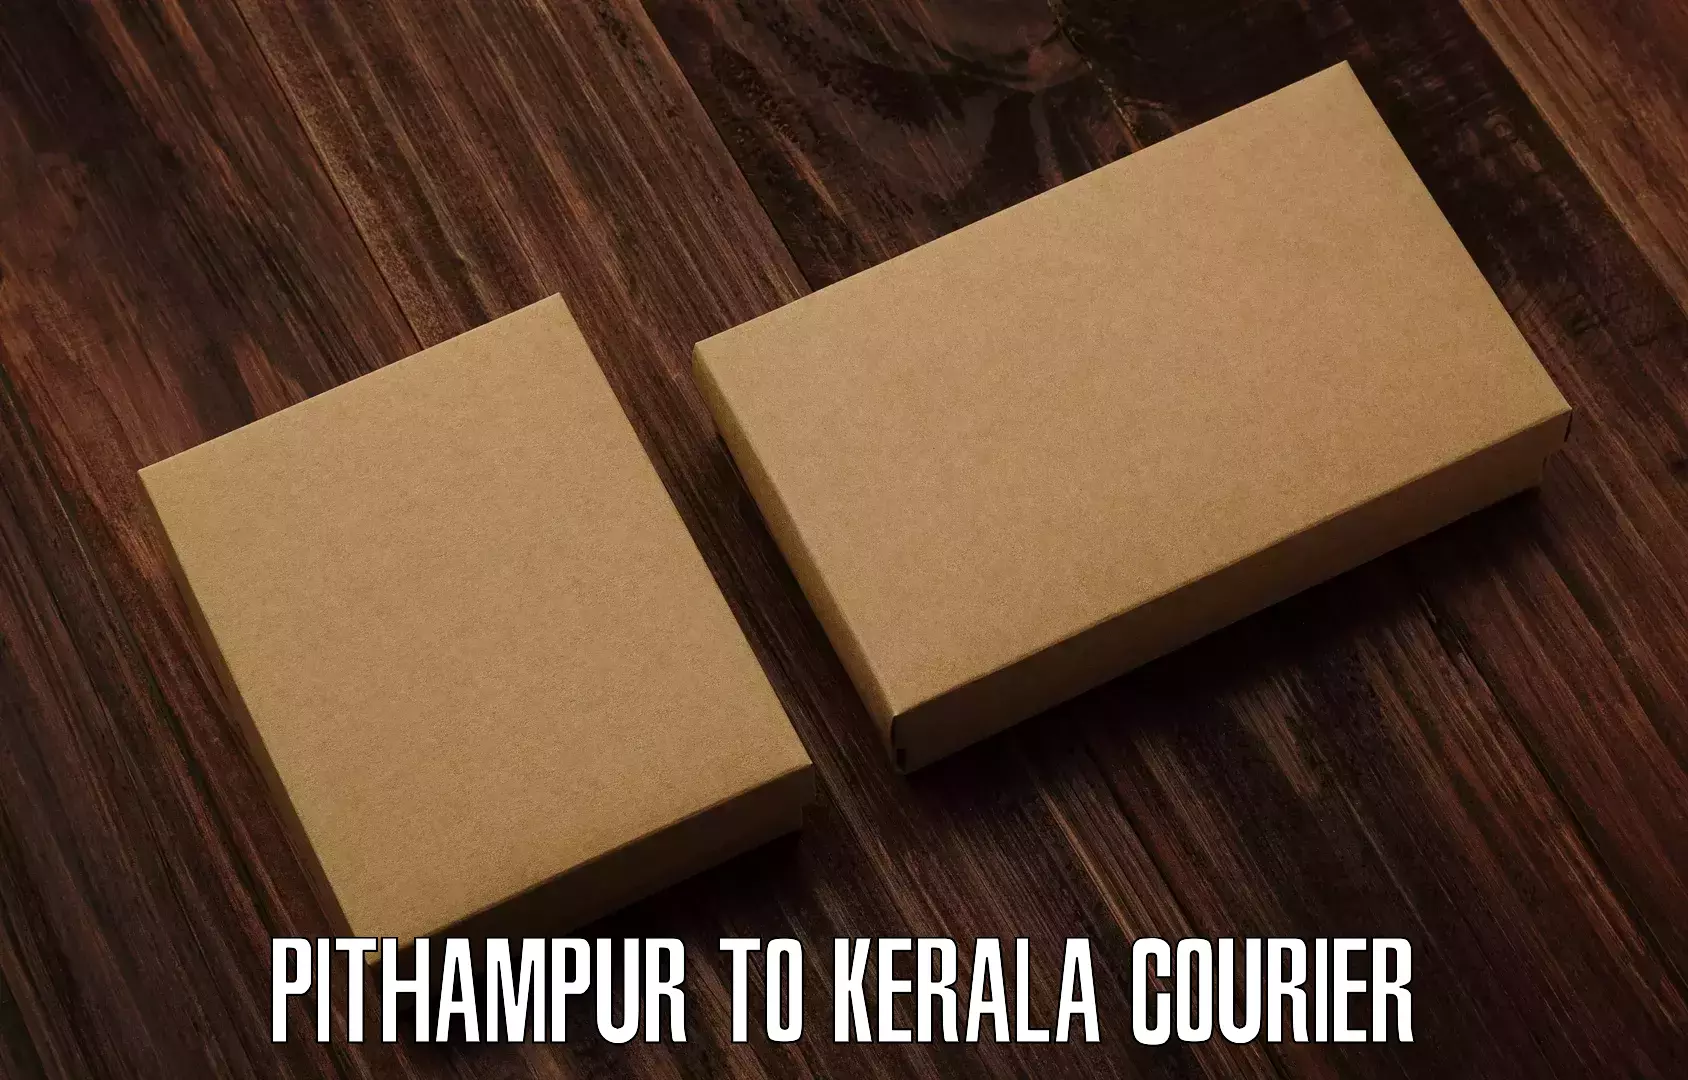 Courier service innovation Pithampur to Cochin Port Kochi